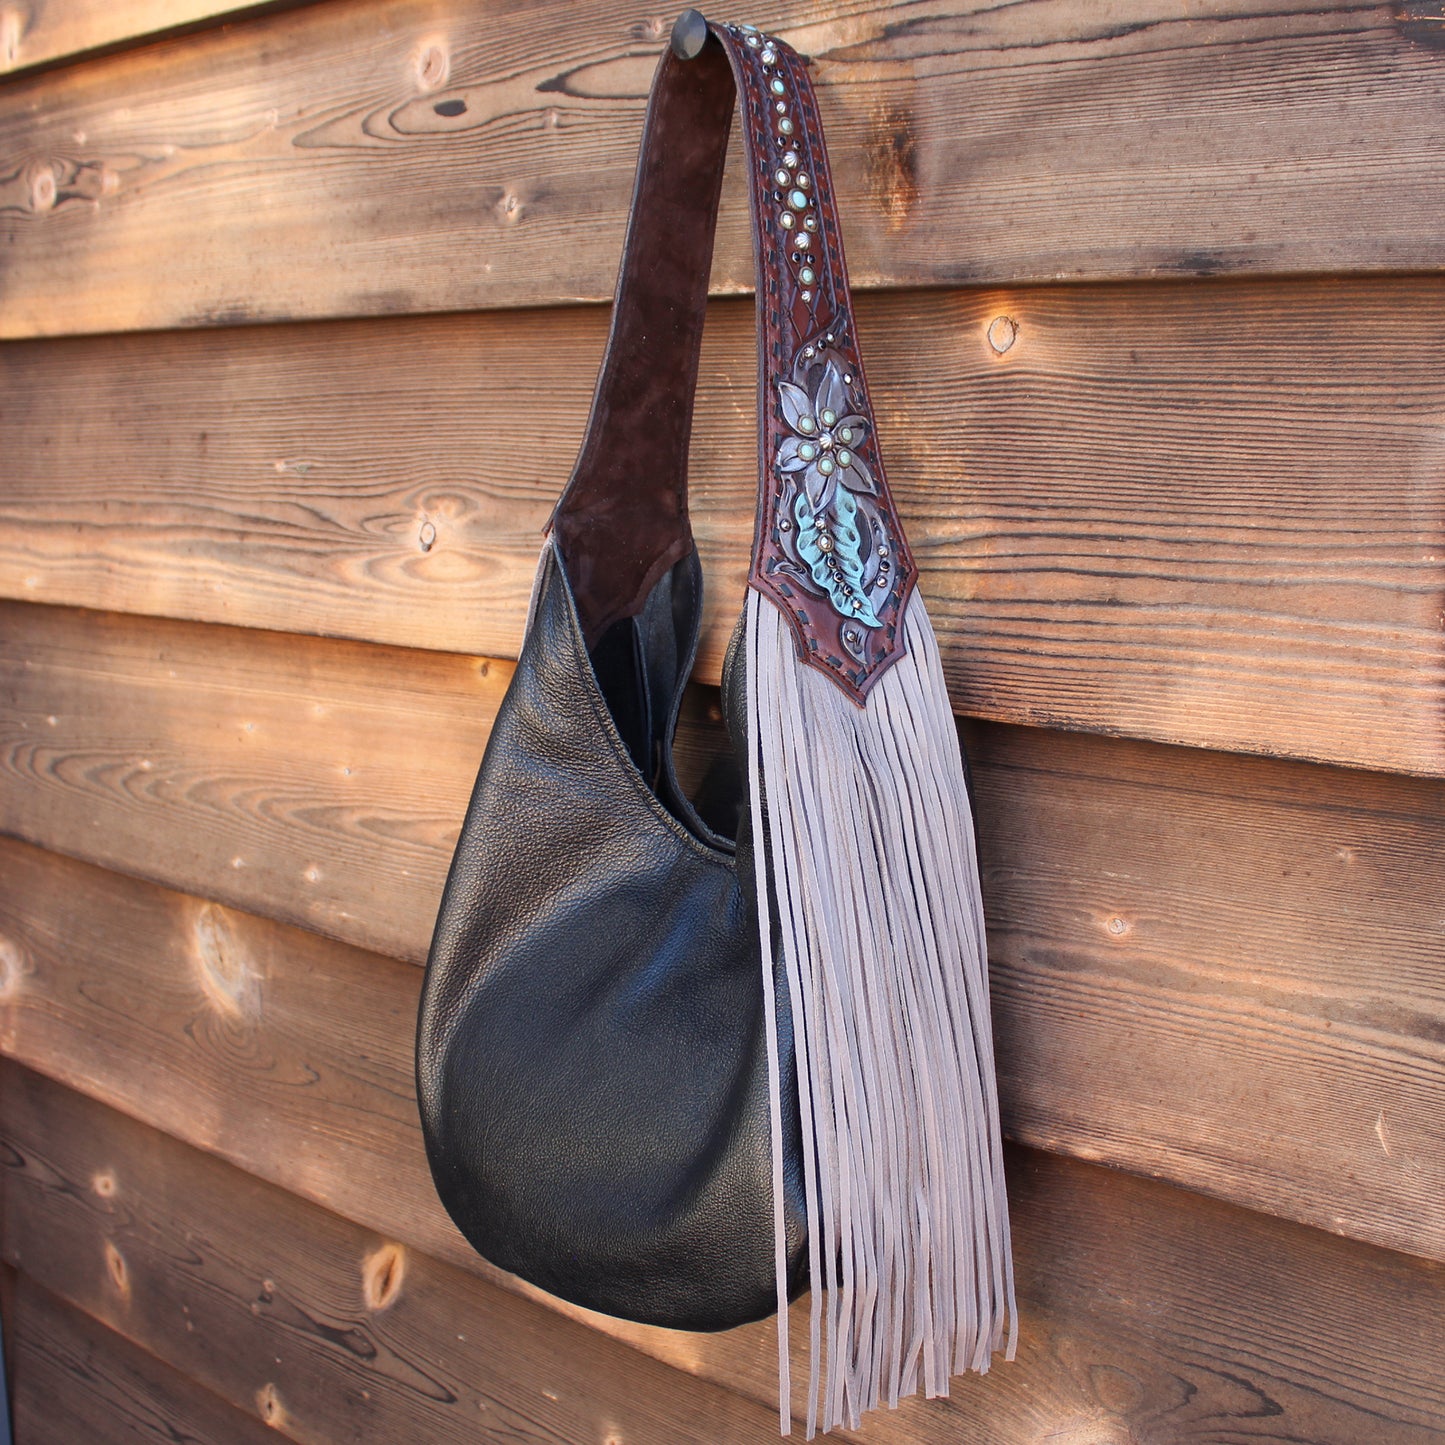 
                  
                    A black leather Heritage Brand marilyn bag #972 with decorative fringe and metallic accents hanging against a wooden backdrop.
                  
                